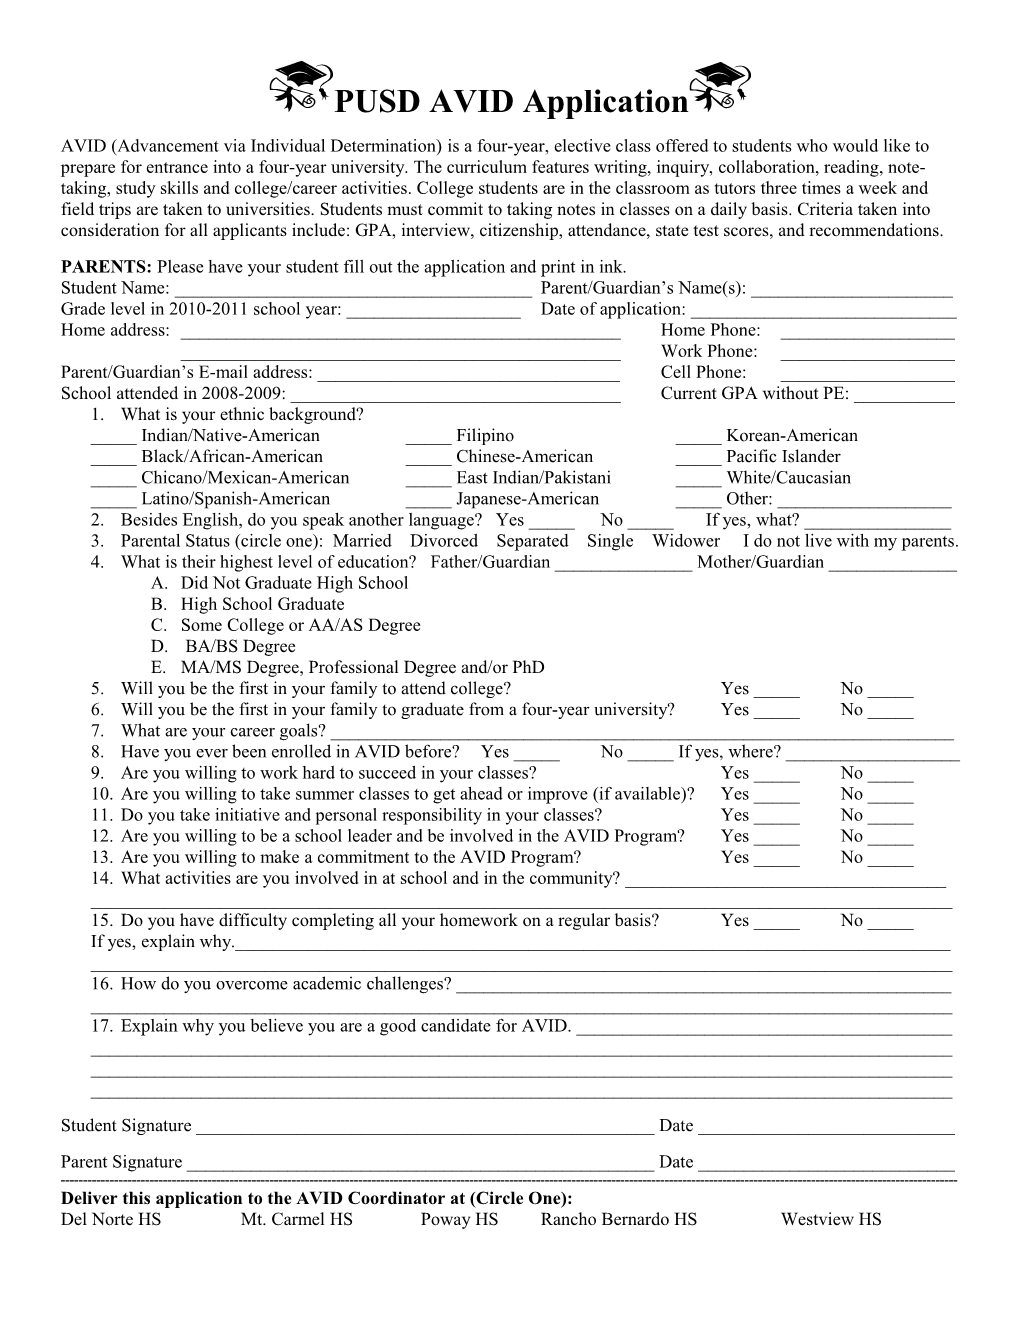 PARENTS: Please Have Your Student Fill out the Application and Print in Ink